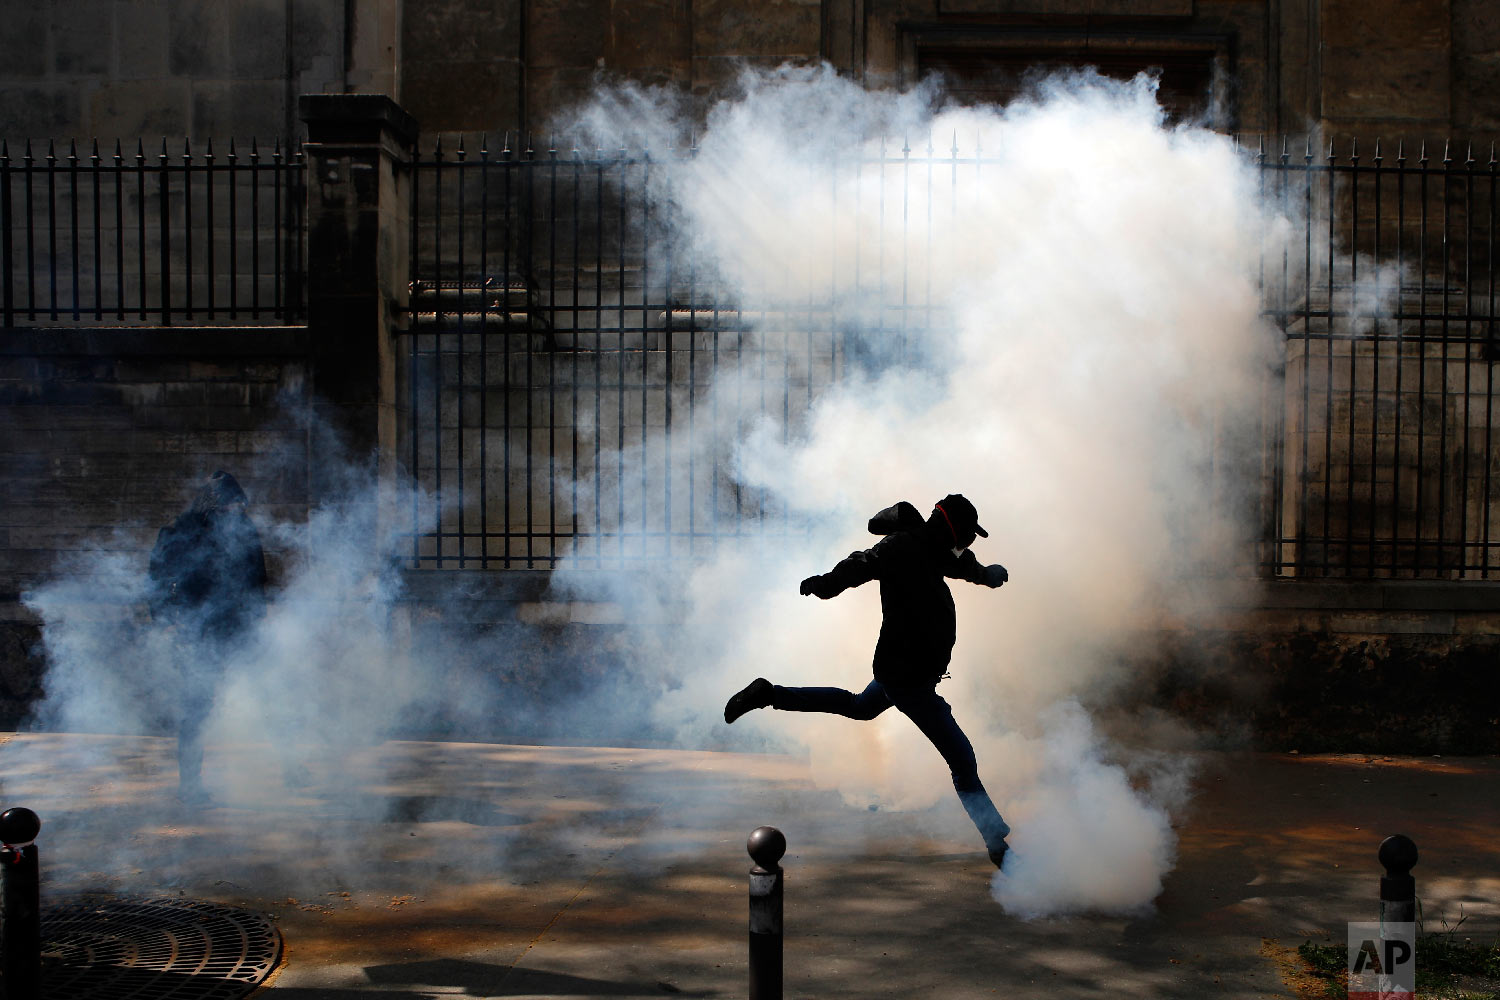  Activist kicks a tear canister gas shot by riot police during a protest in support of the French railway employees, in Paris, France on April 19, 2018. (AP Photo/Francois Mori) 